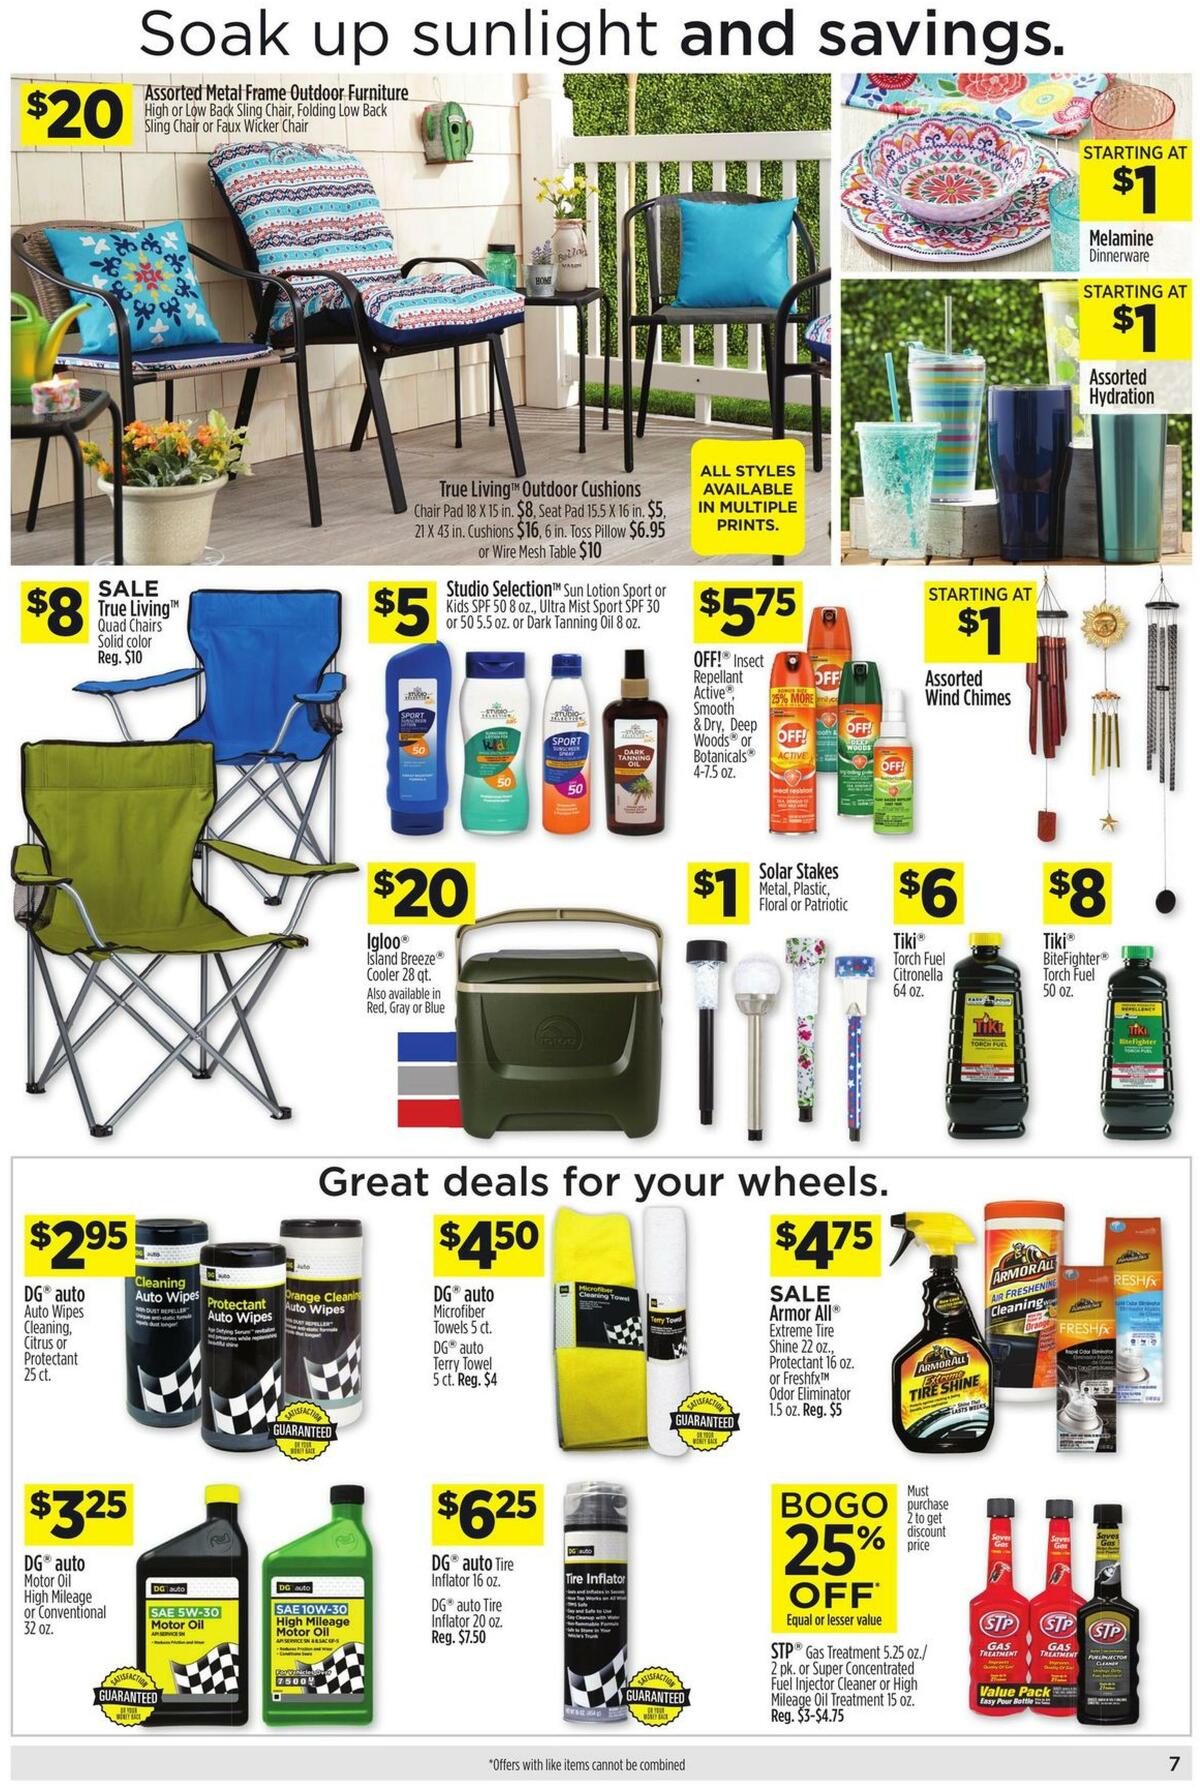 Dollar General Weekly Ad from April 26